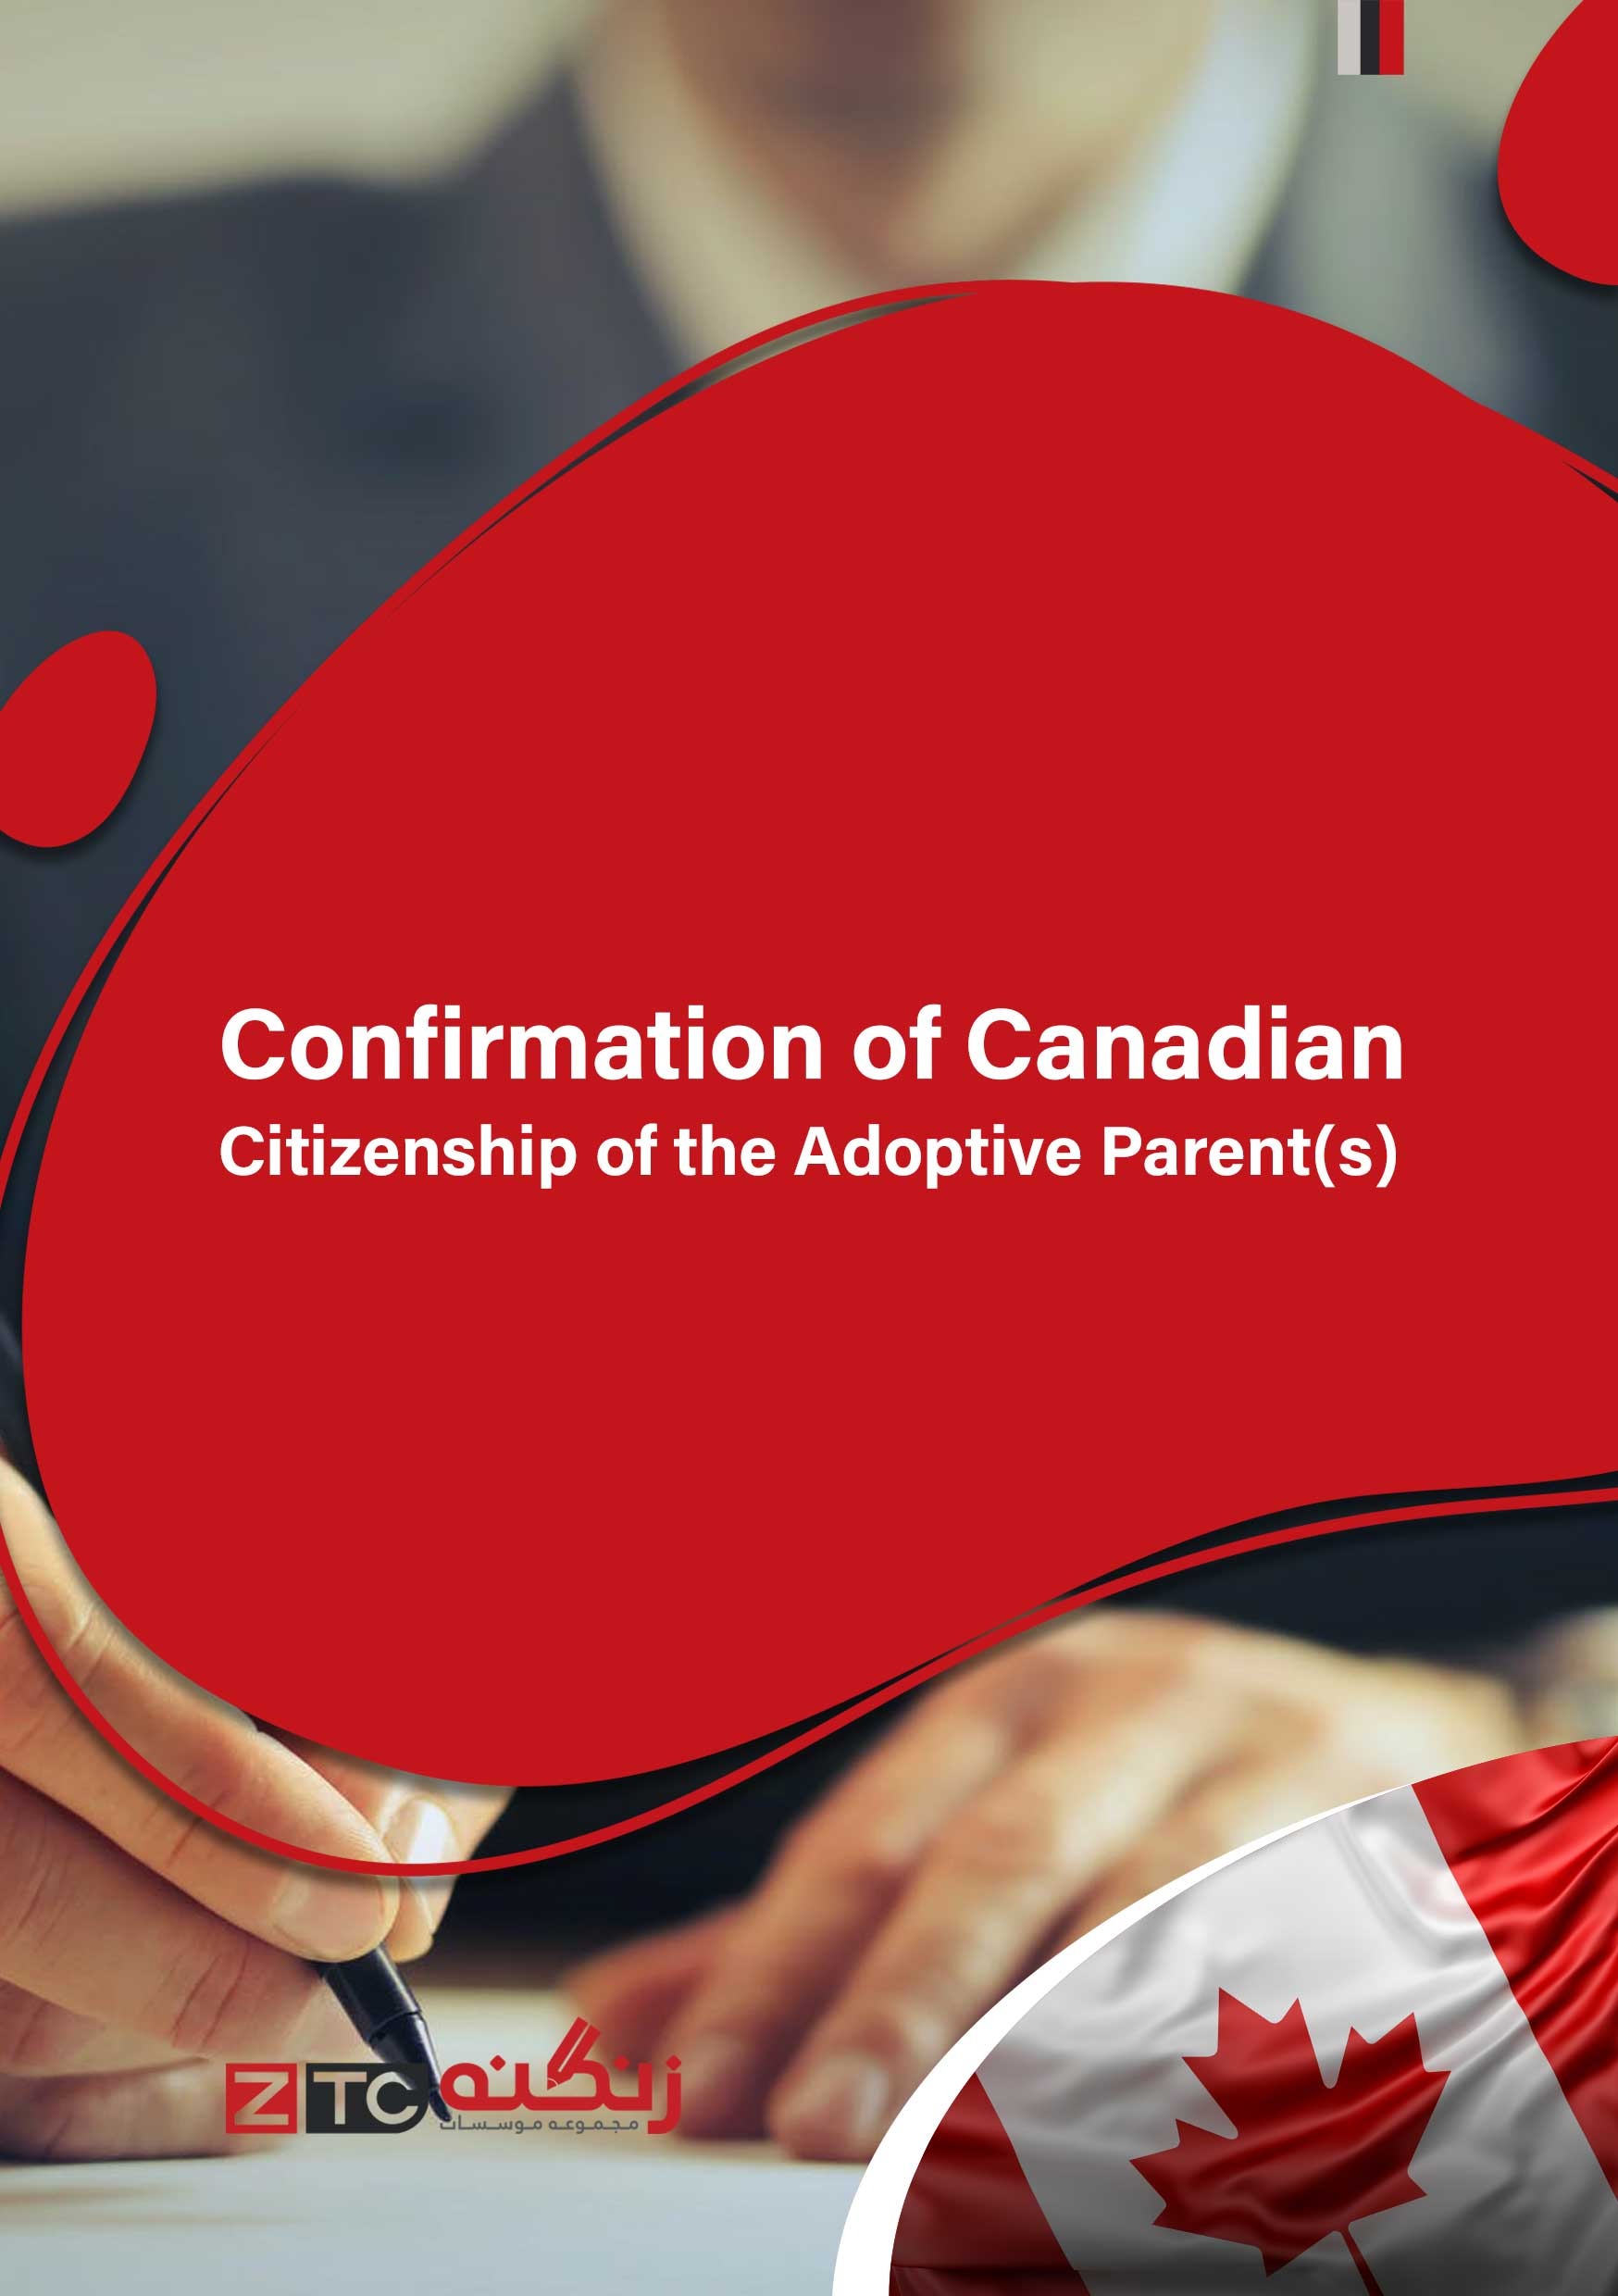 Confirmation of Canadian Citizenship of the Adoptive Parent(s)